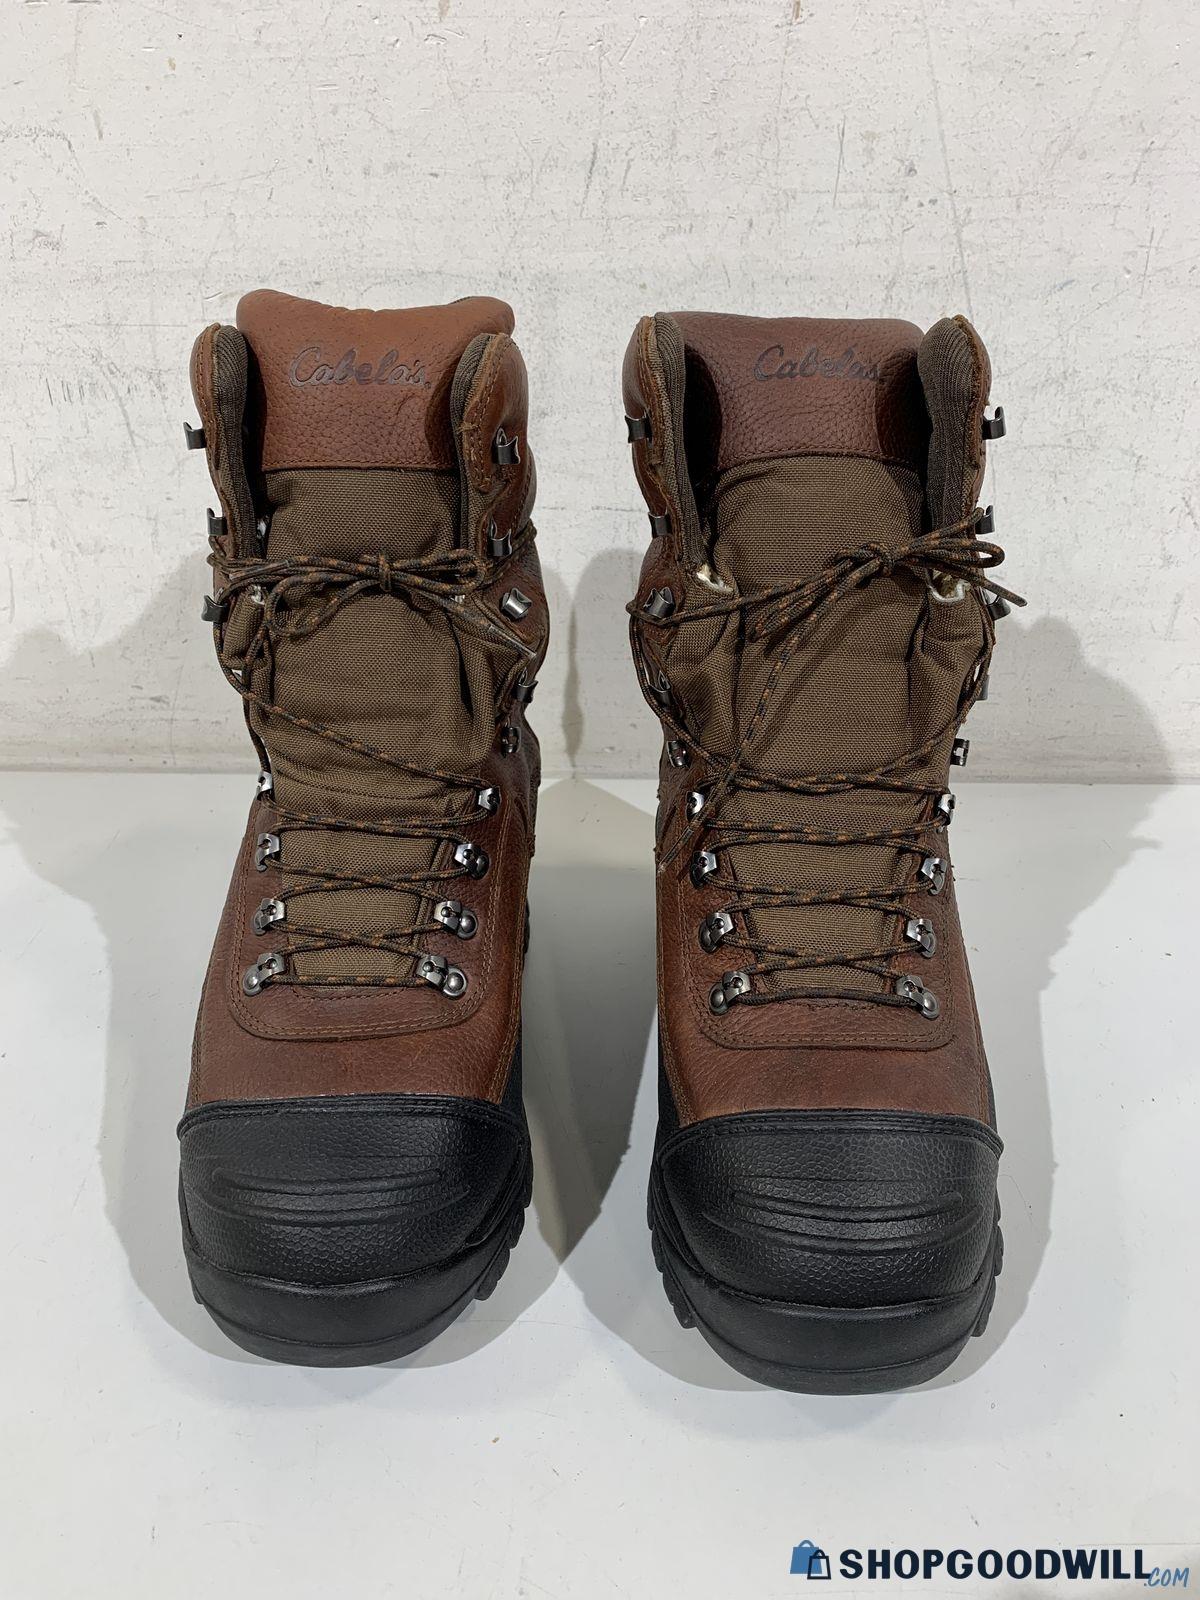 Cabela's Predator Extreme Pac Boots leather insulated 83-0435 Men's 10D ...